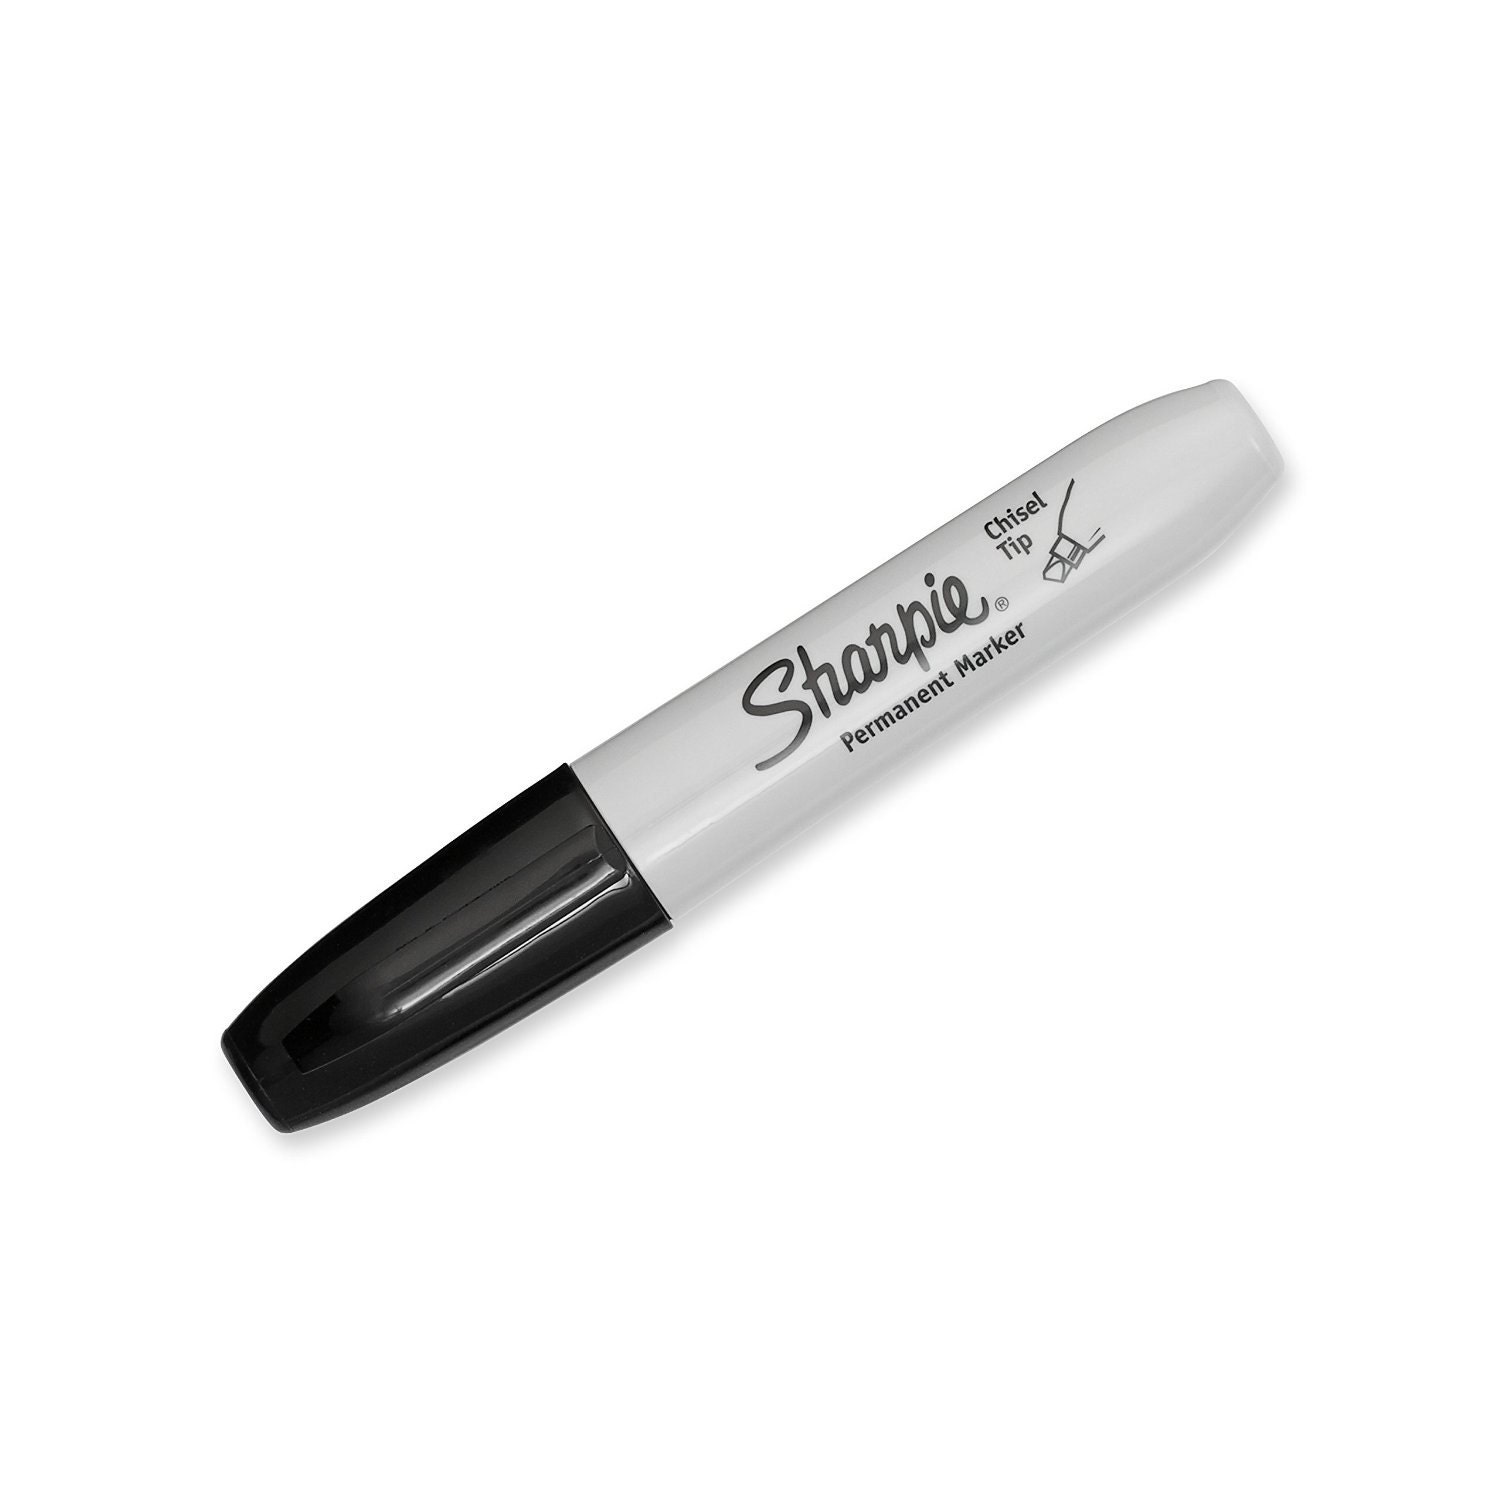 Sharpie Permanent Markers, Chisel Tip, Classic Colors, 8 Count